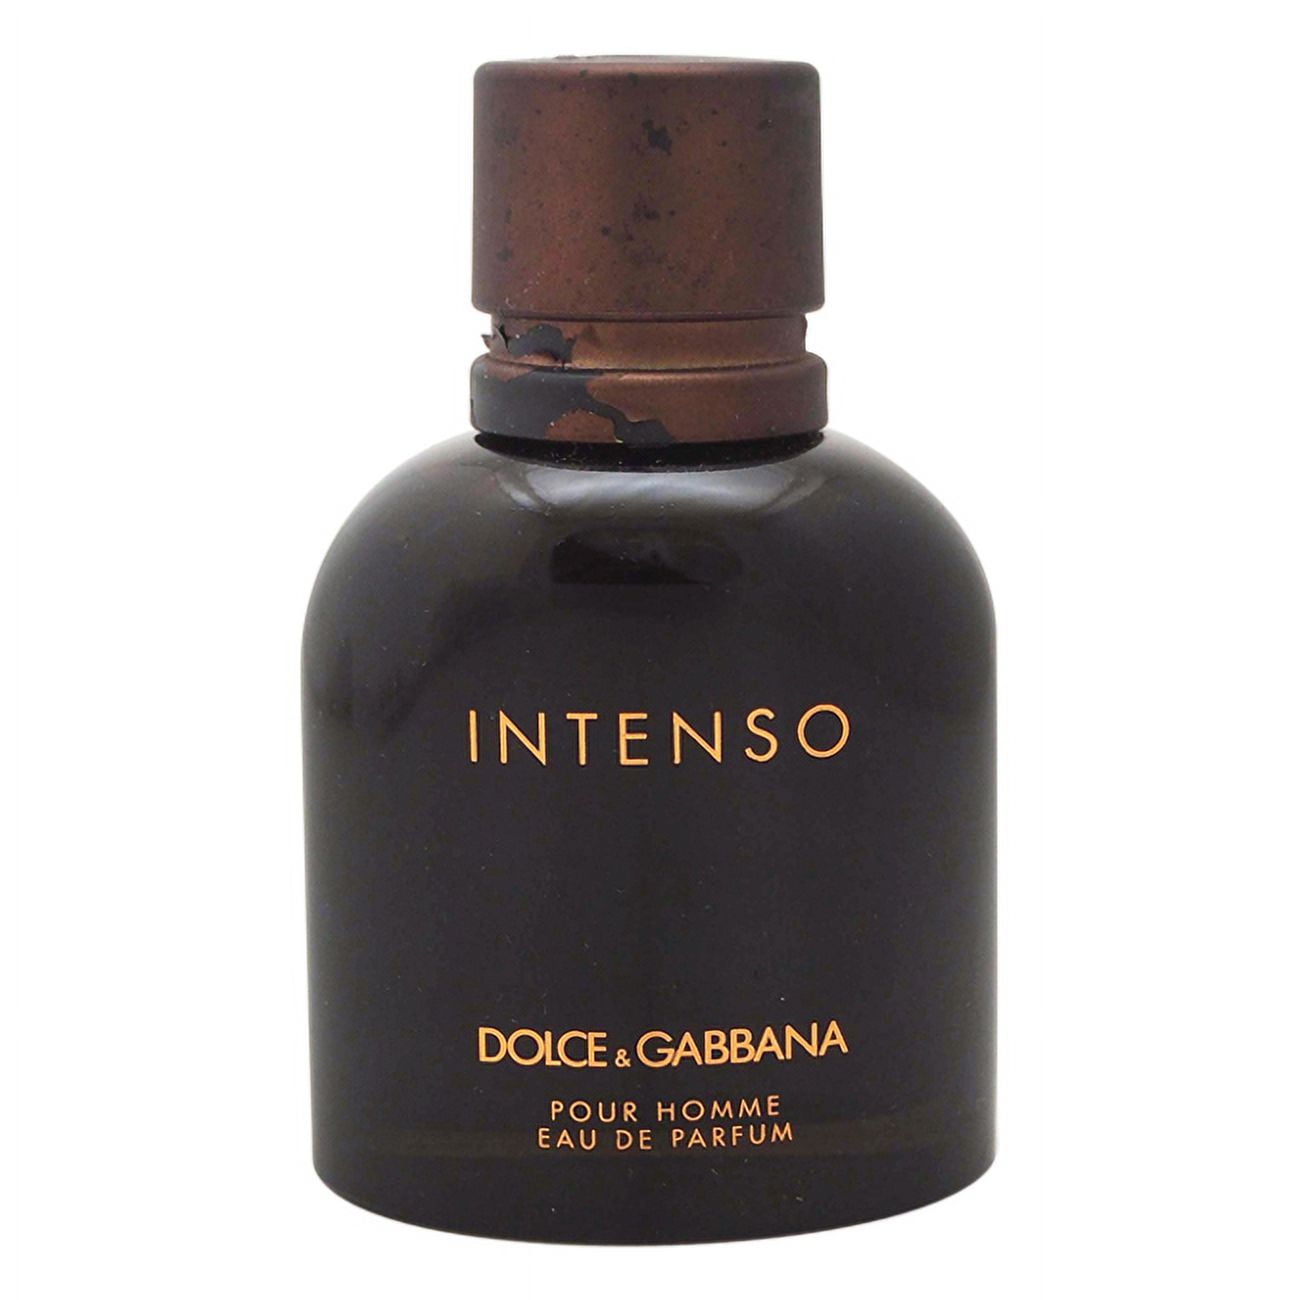 Dolce & Gabbana Intenso Pour Homme 2.5oz EDP Spray Read Listing In  Sealed Box